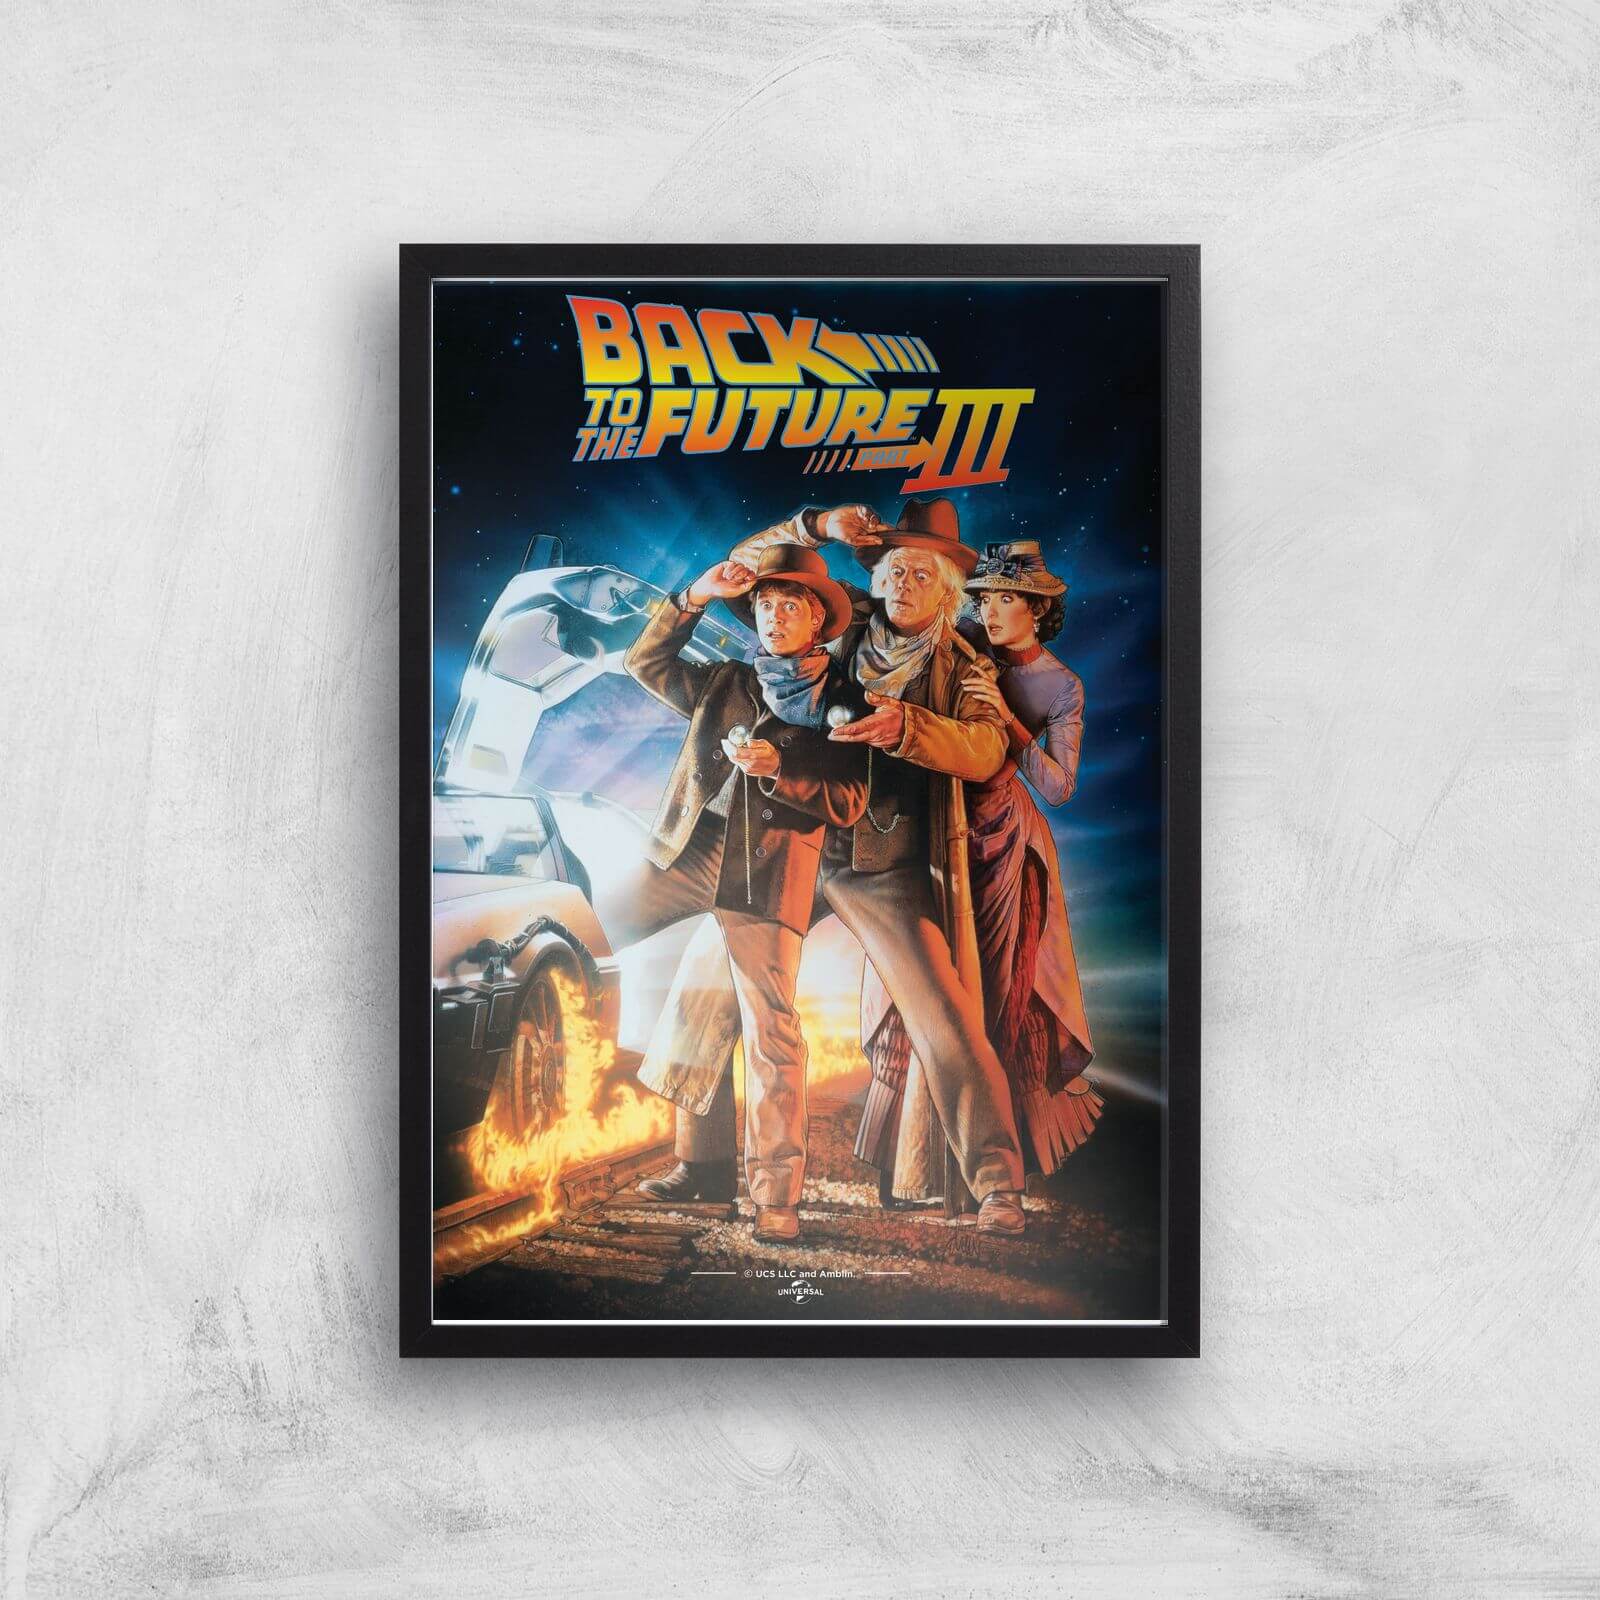 Back To The Future Part 3 Giclee Art Print - A3 - Black Frame